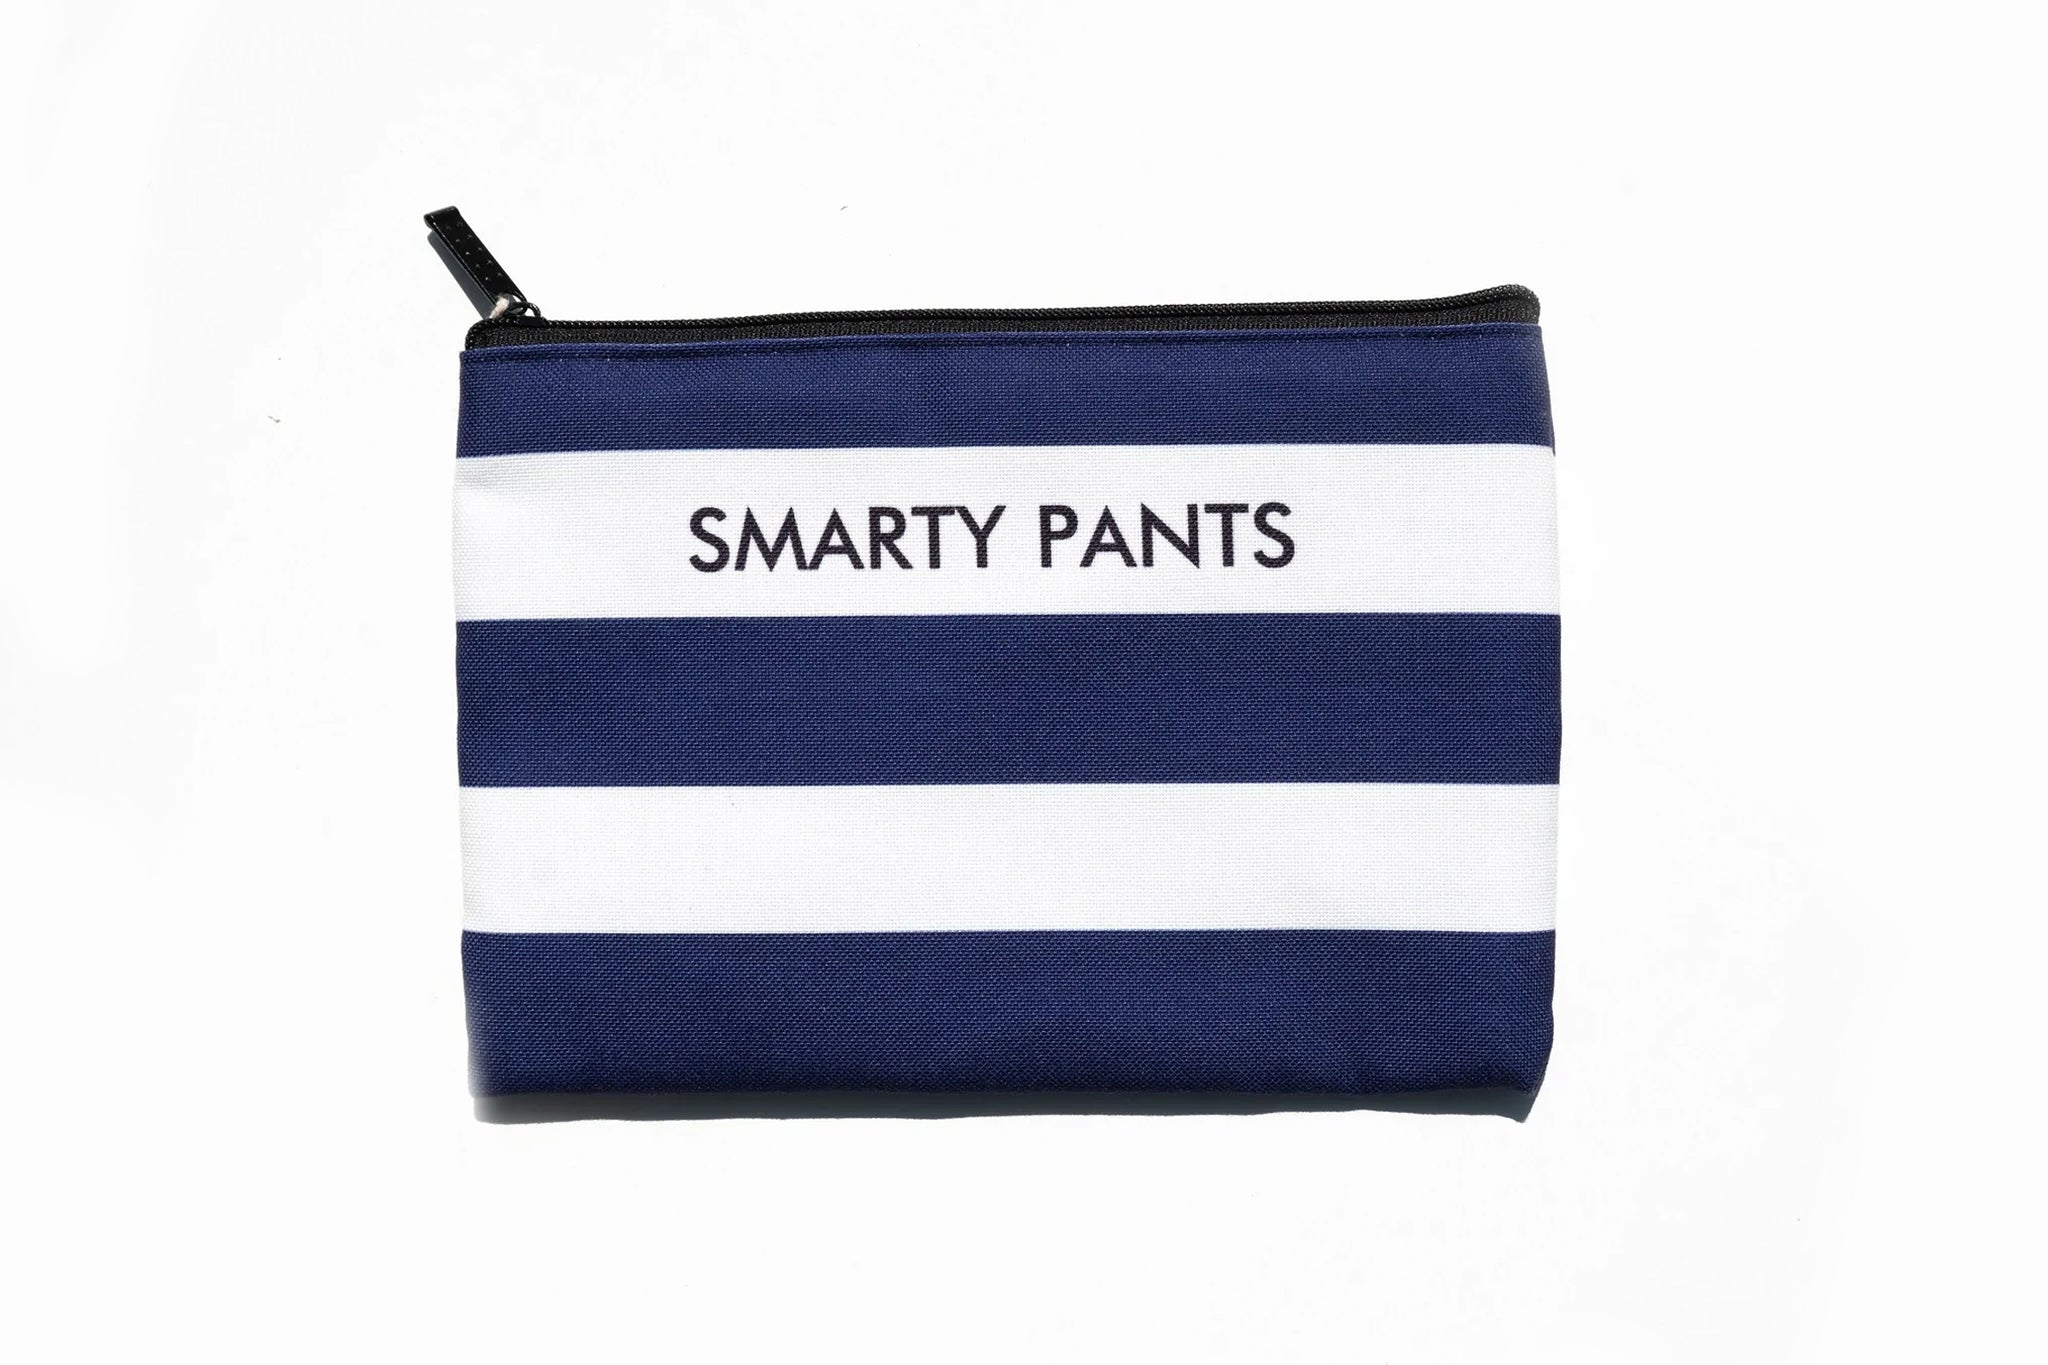 SMARTY PANTS- POUCH